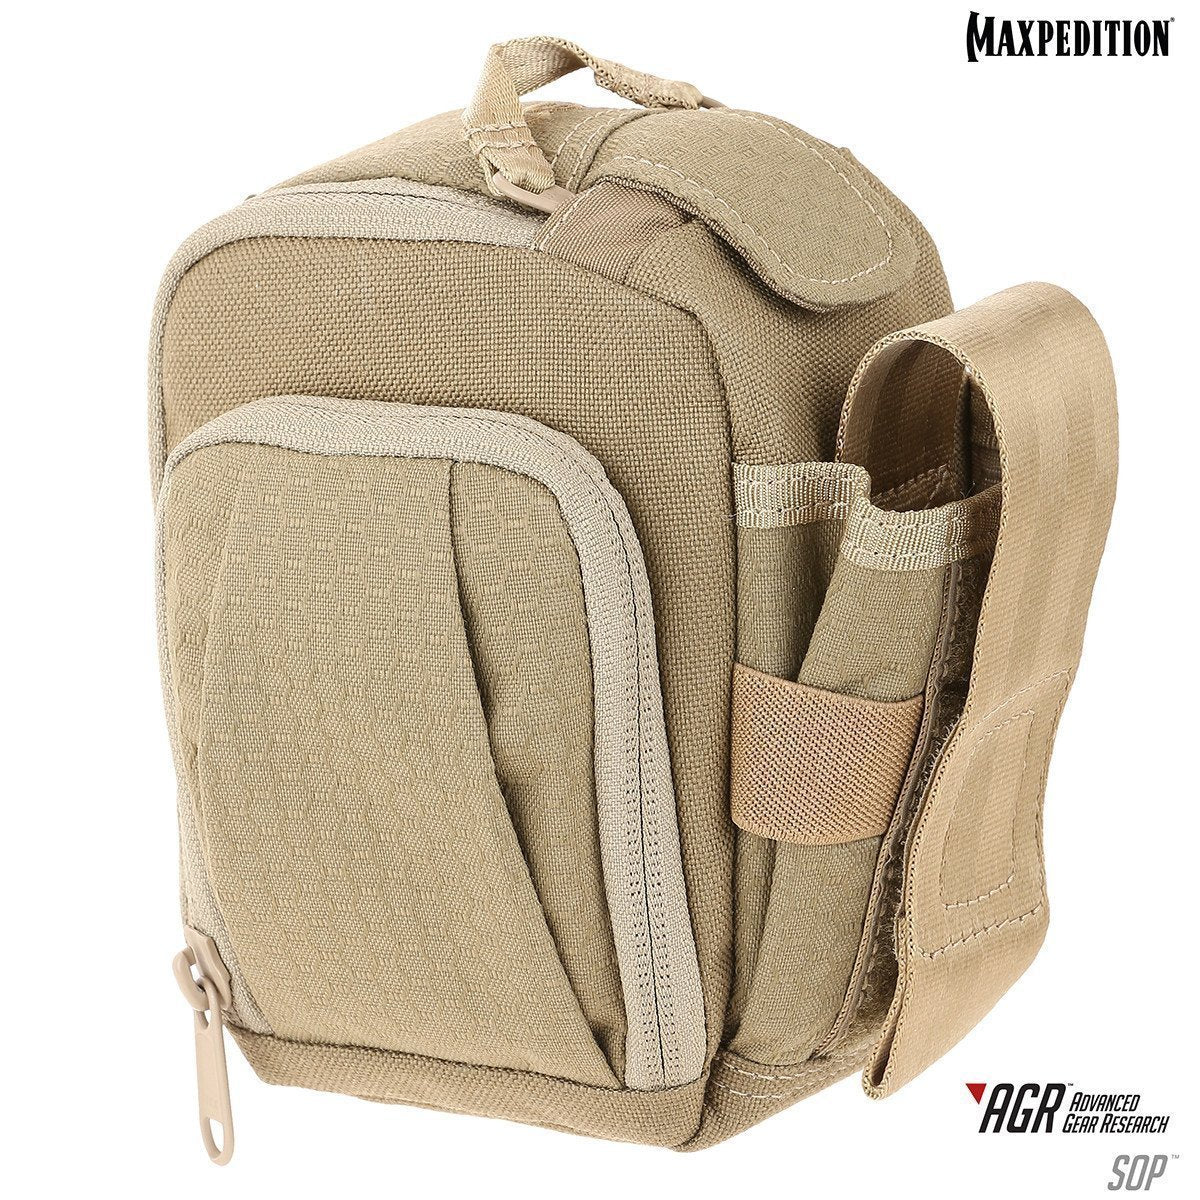 Maxpedition SOP Side Opening Pouch Tan Tactical Distributors Ltd New Zealand